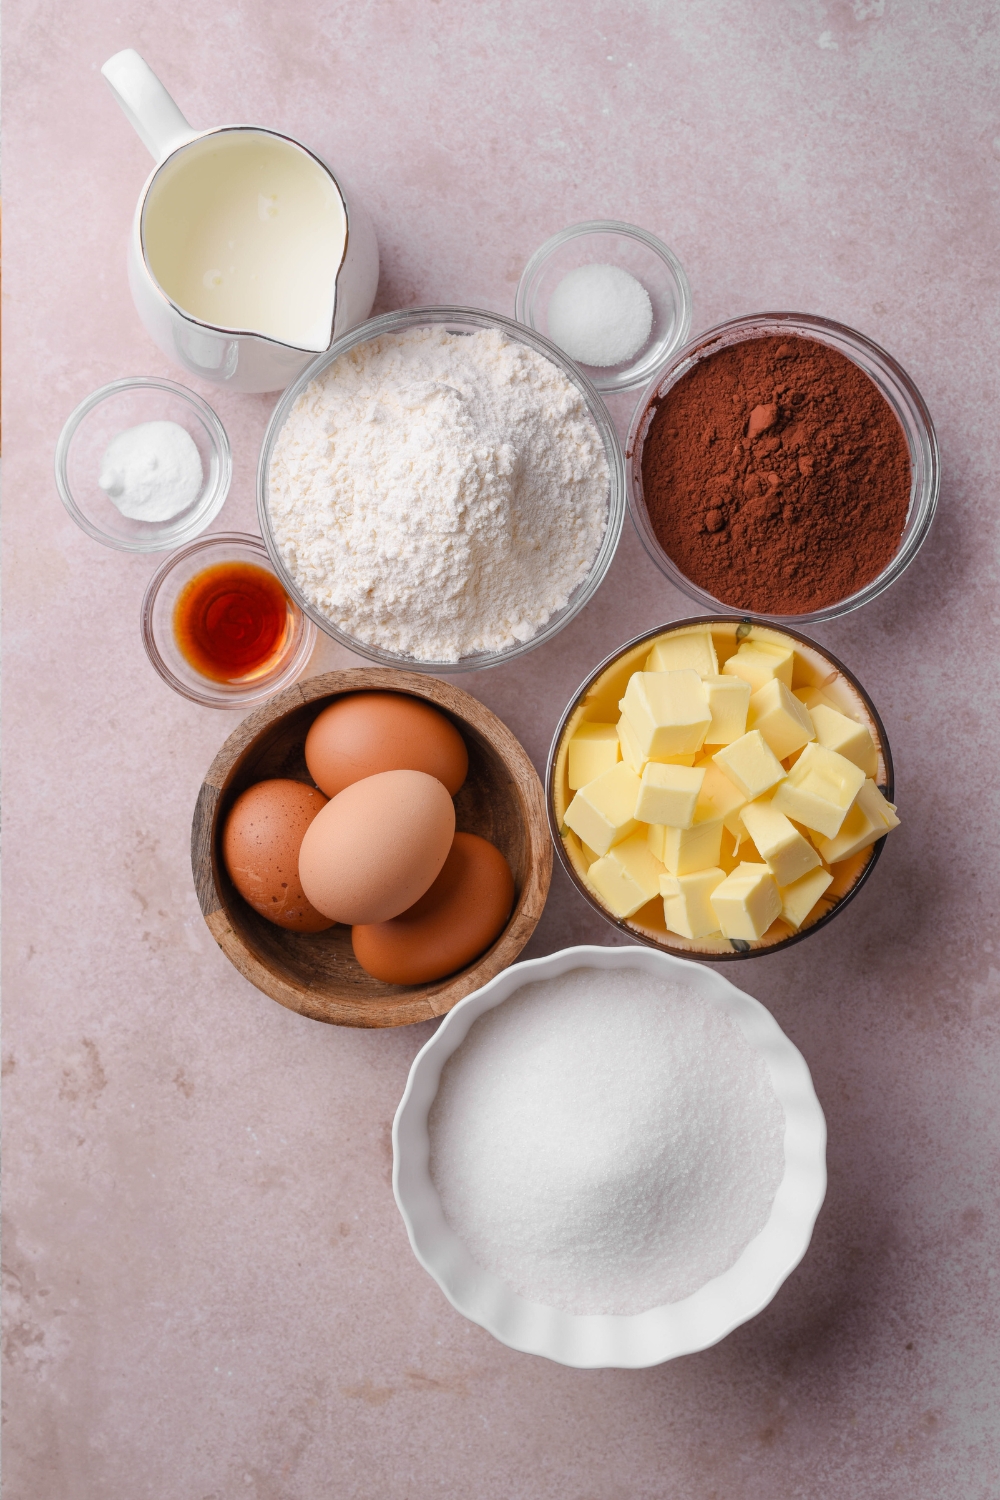 Buttermilk, flour, salt, baking powder, cocoa powder, cubed butter, eggs, vanilla, and white sugar are all in separate bowls on a counter top.